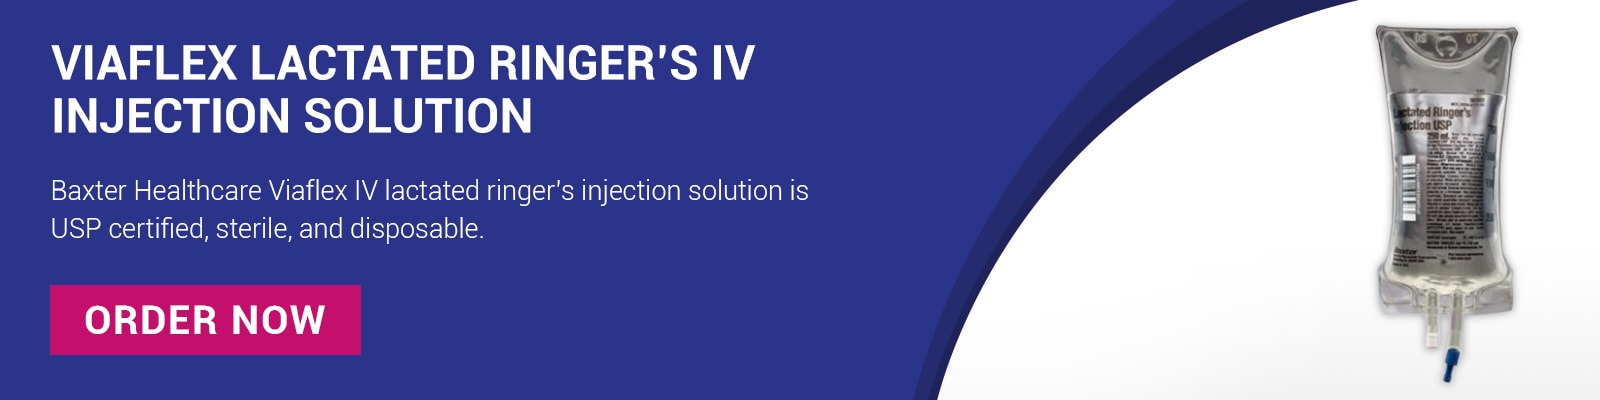 Baxter Healthcare Viaflex Lactated Ringers IV Injection Solution